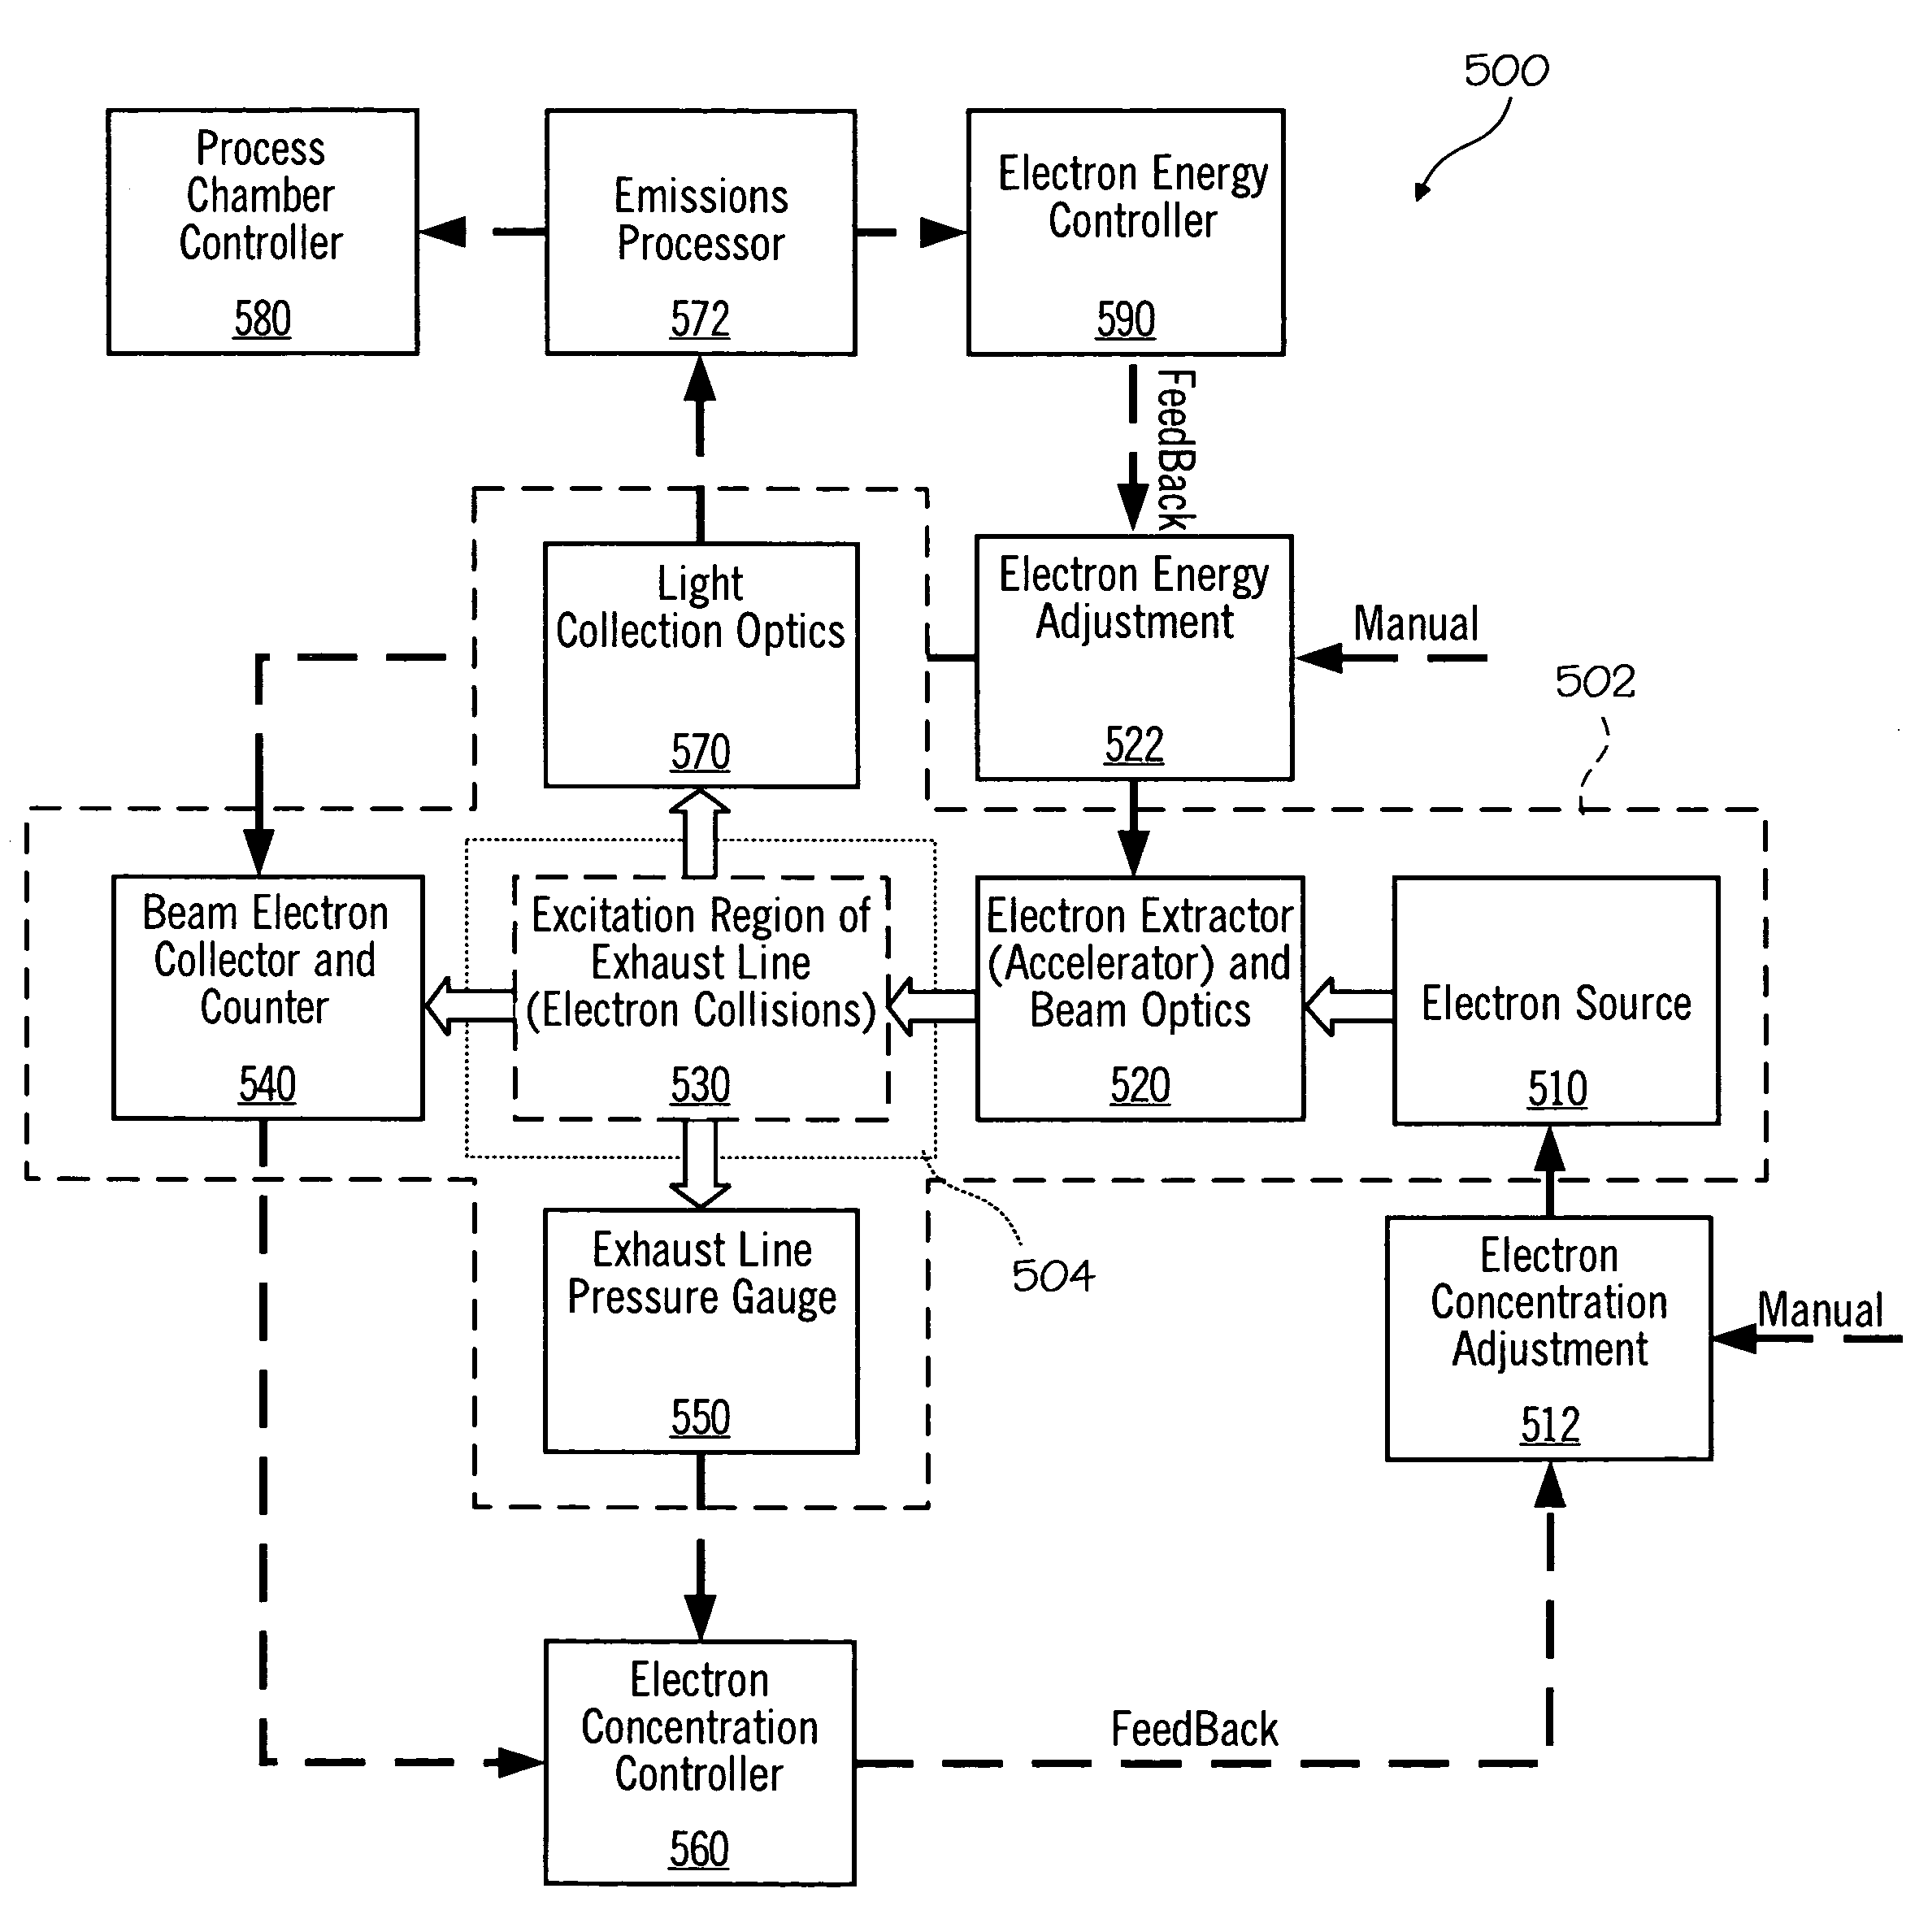 Electron beam exciter for use in chemical analysis in processing systems